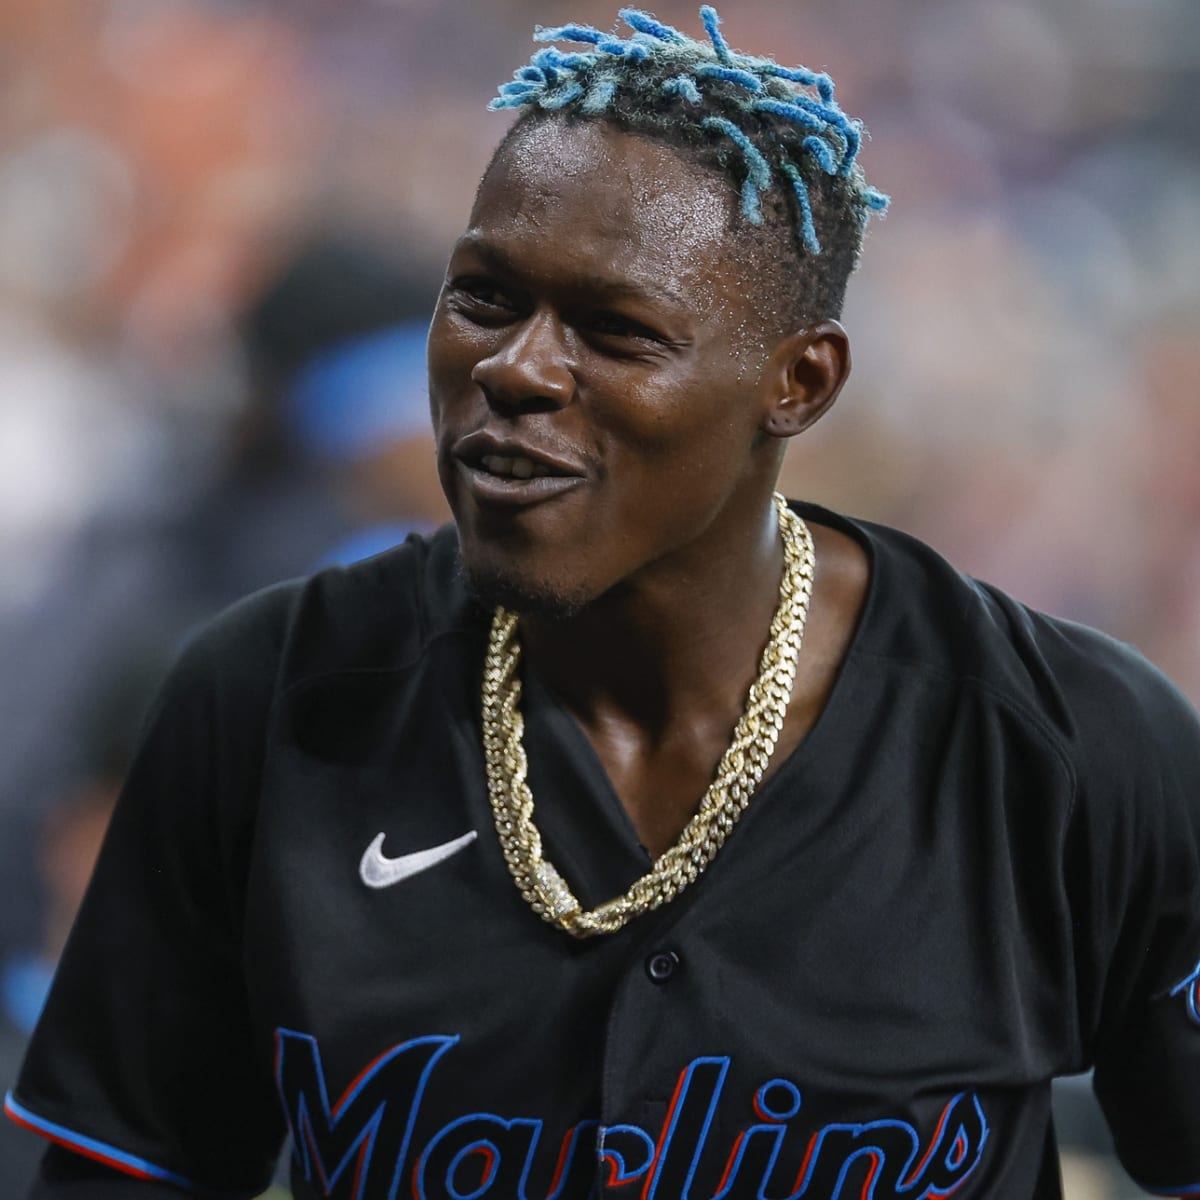 How Far Away is Jazz Chisholm From an Impact with the Miami Marlins?